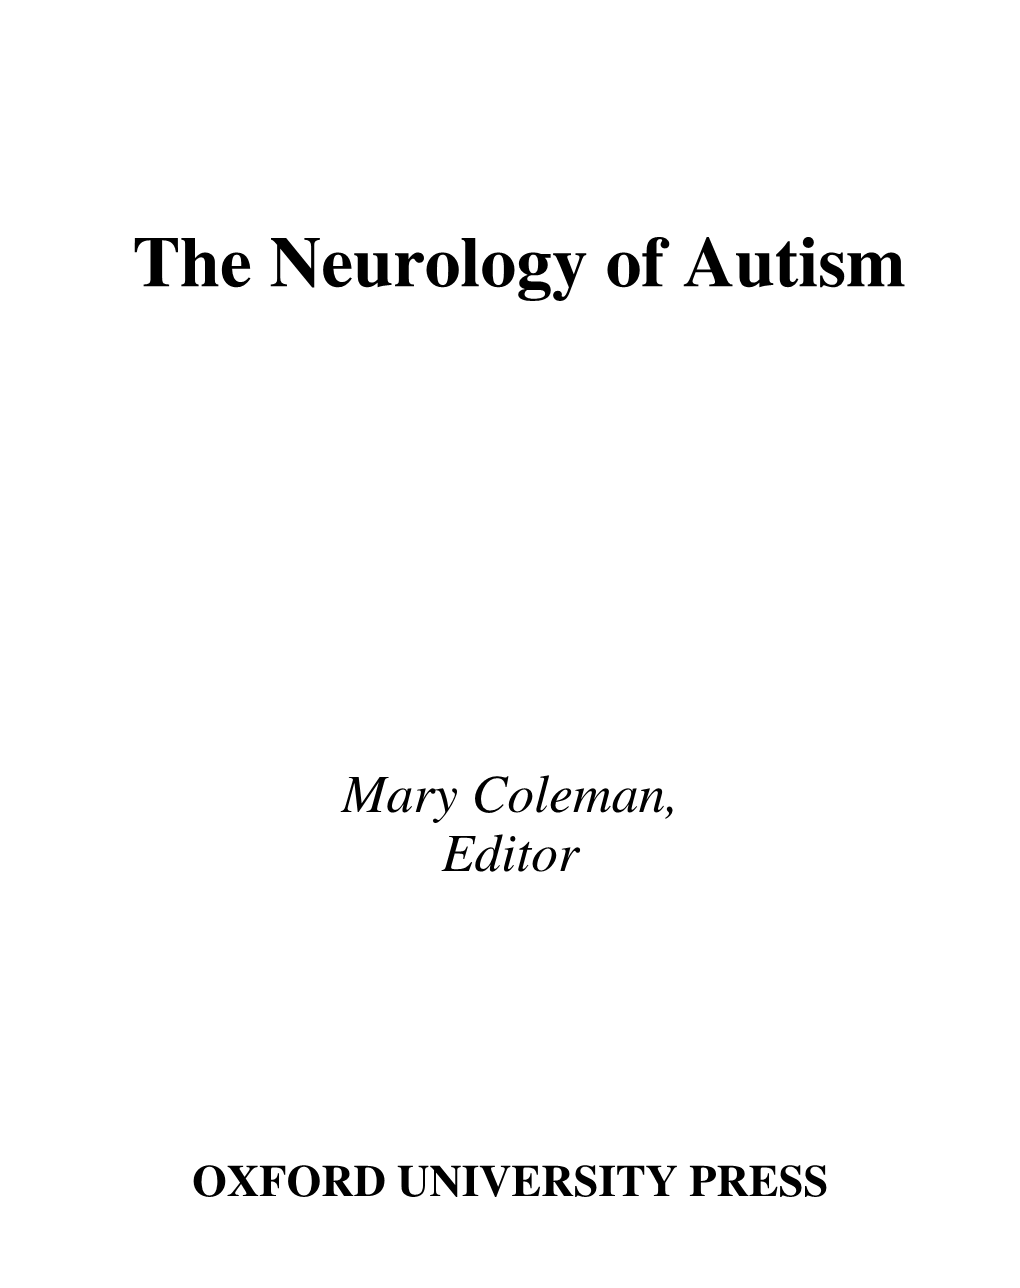 The Neurology of Autism